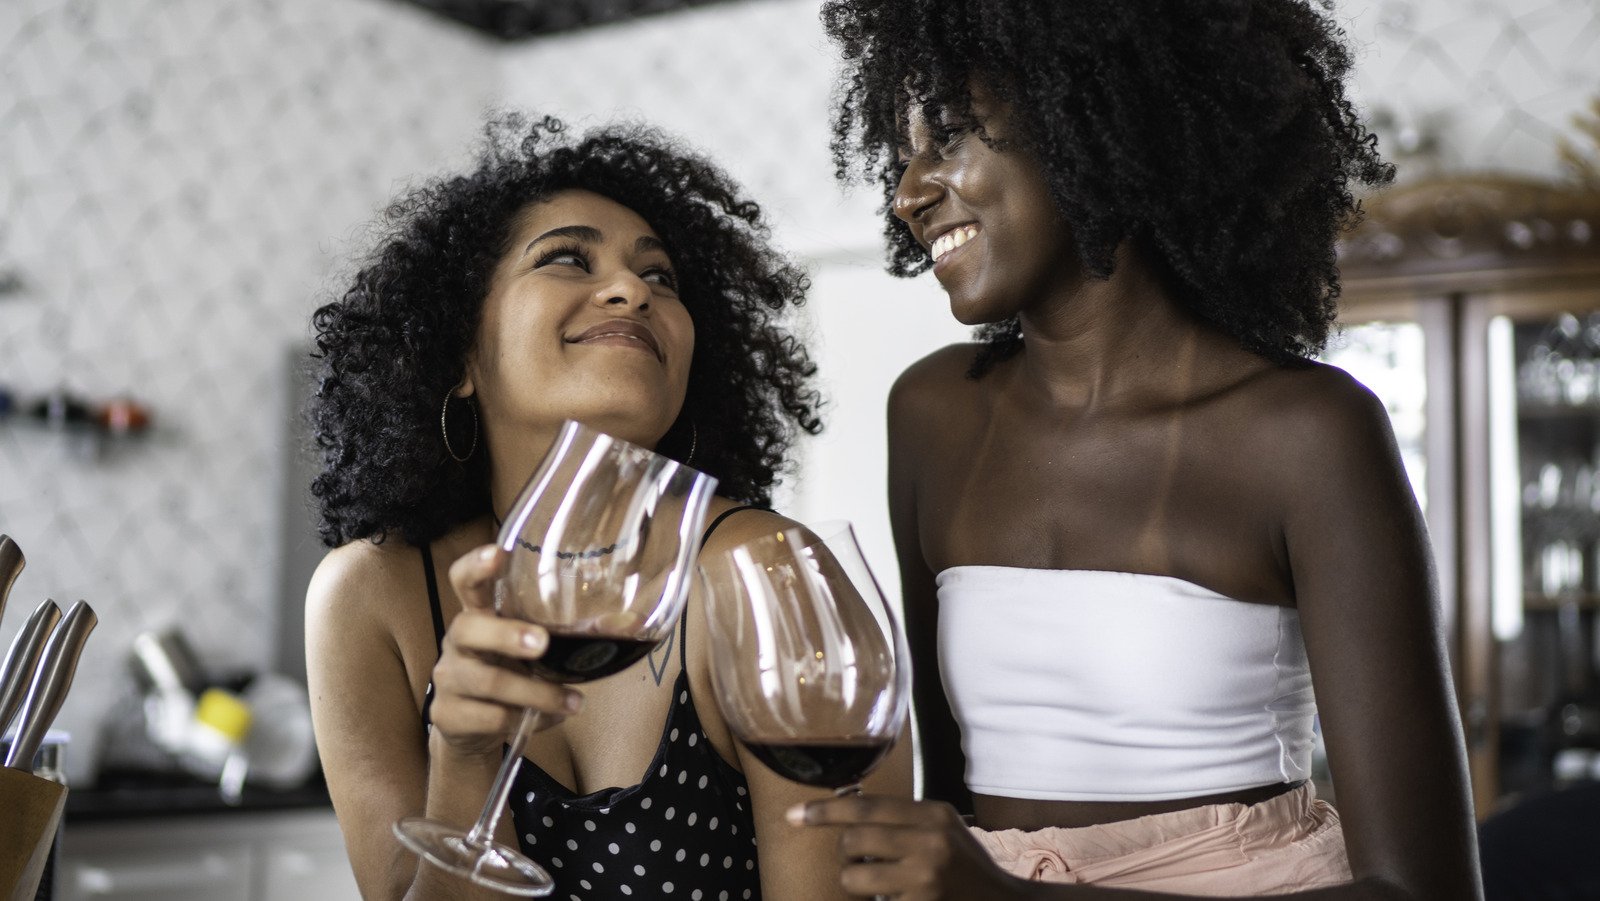 Do You Need To Avoid Wine If You Are Allergic To Sulfa Drugs?